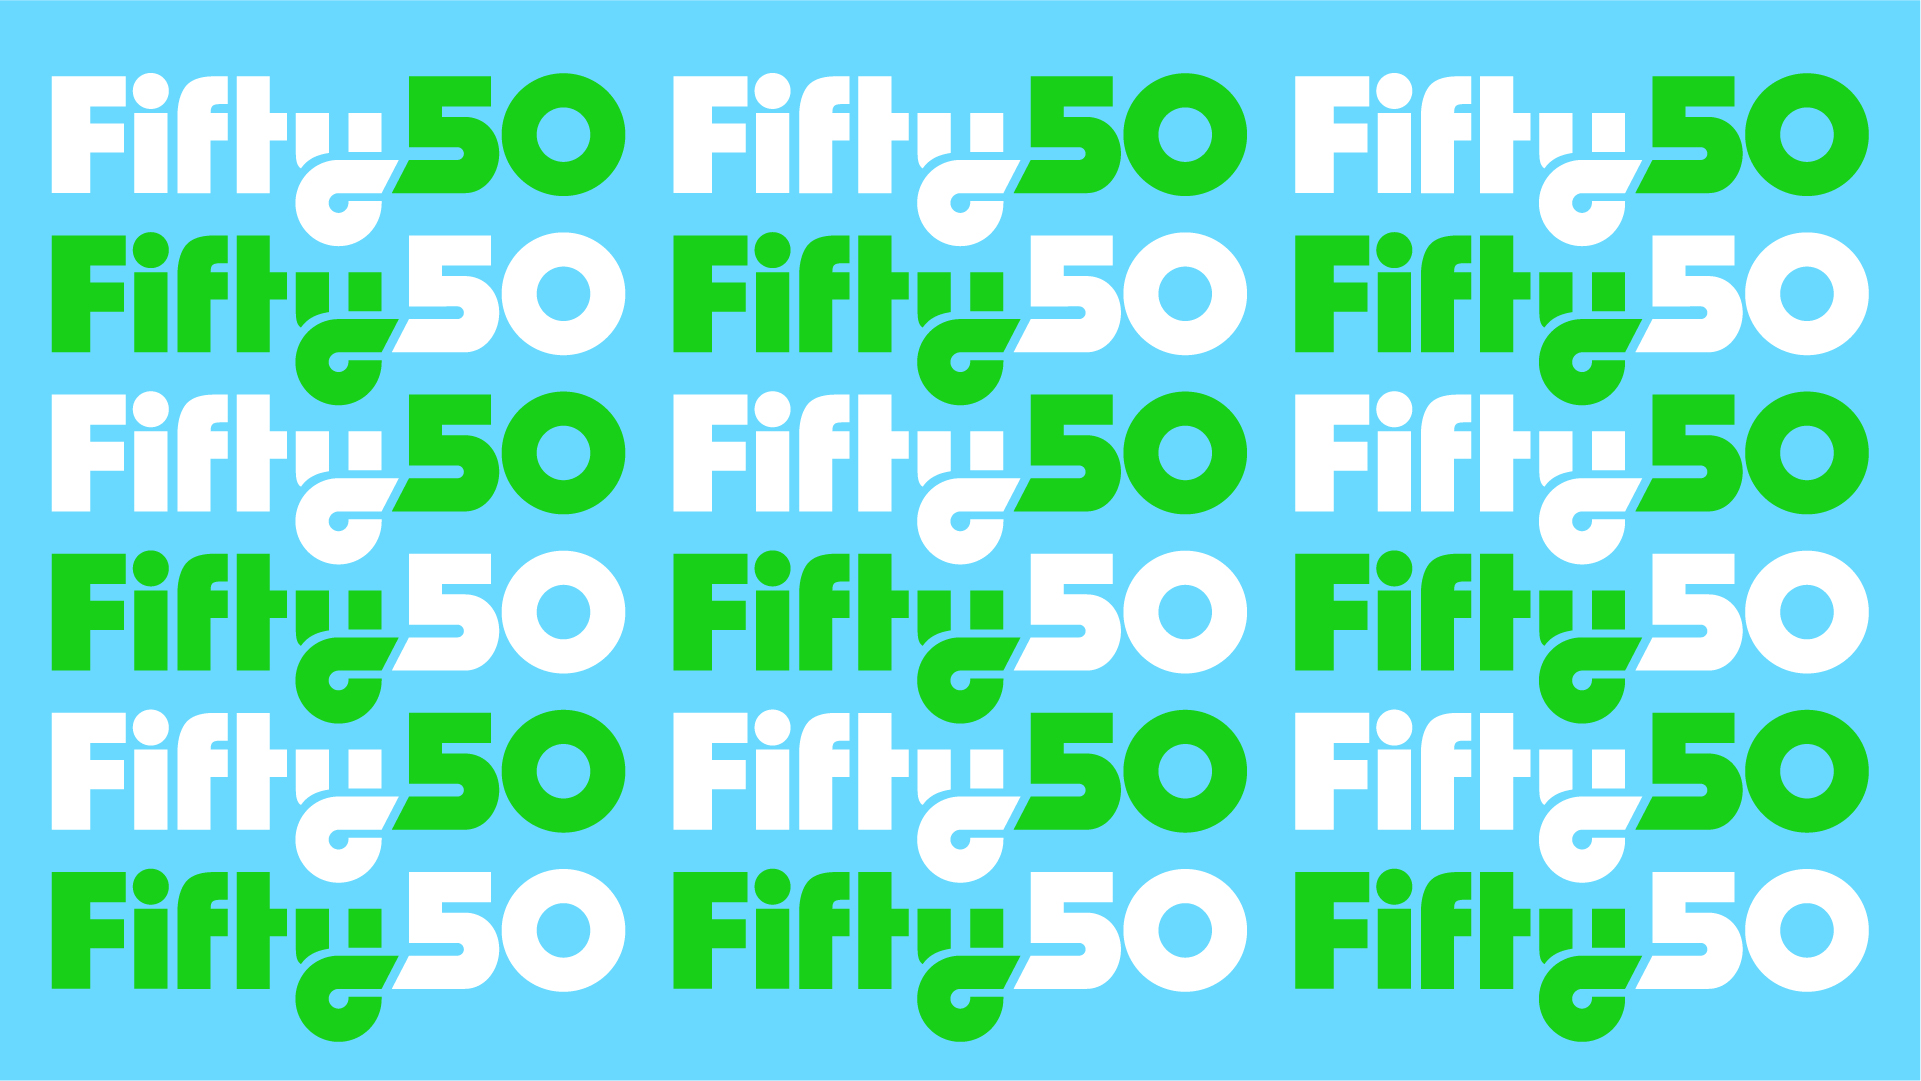 ESPN Announces Content for Fifty/50 Initiative Celebrating Fifty